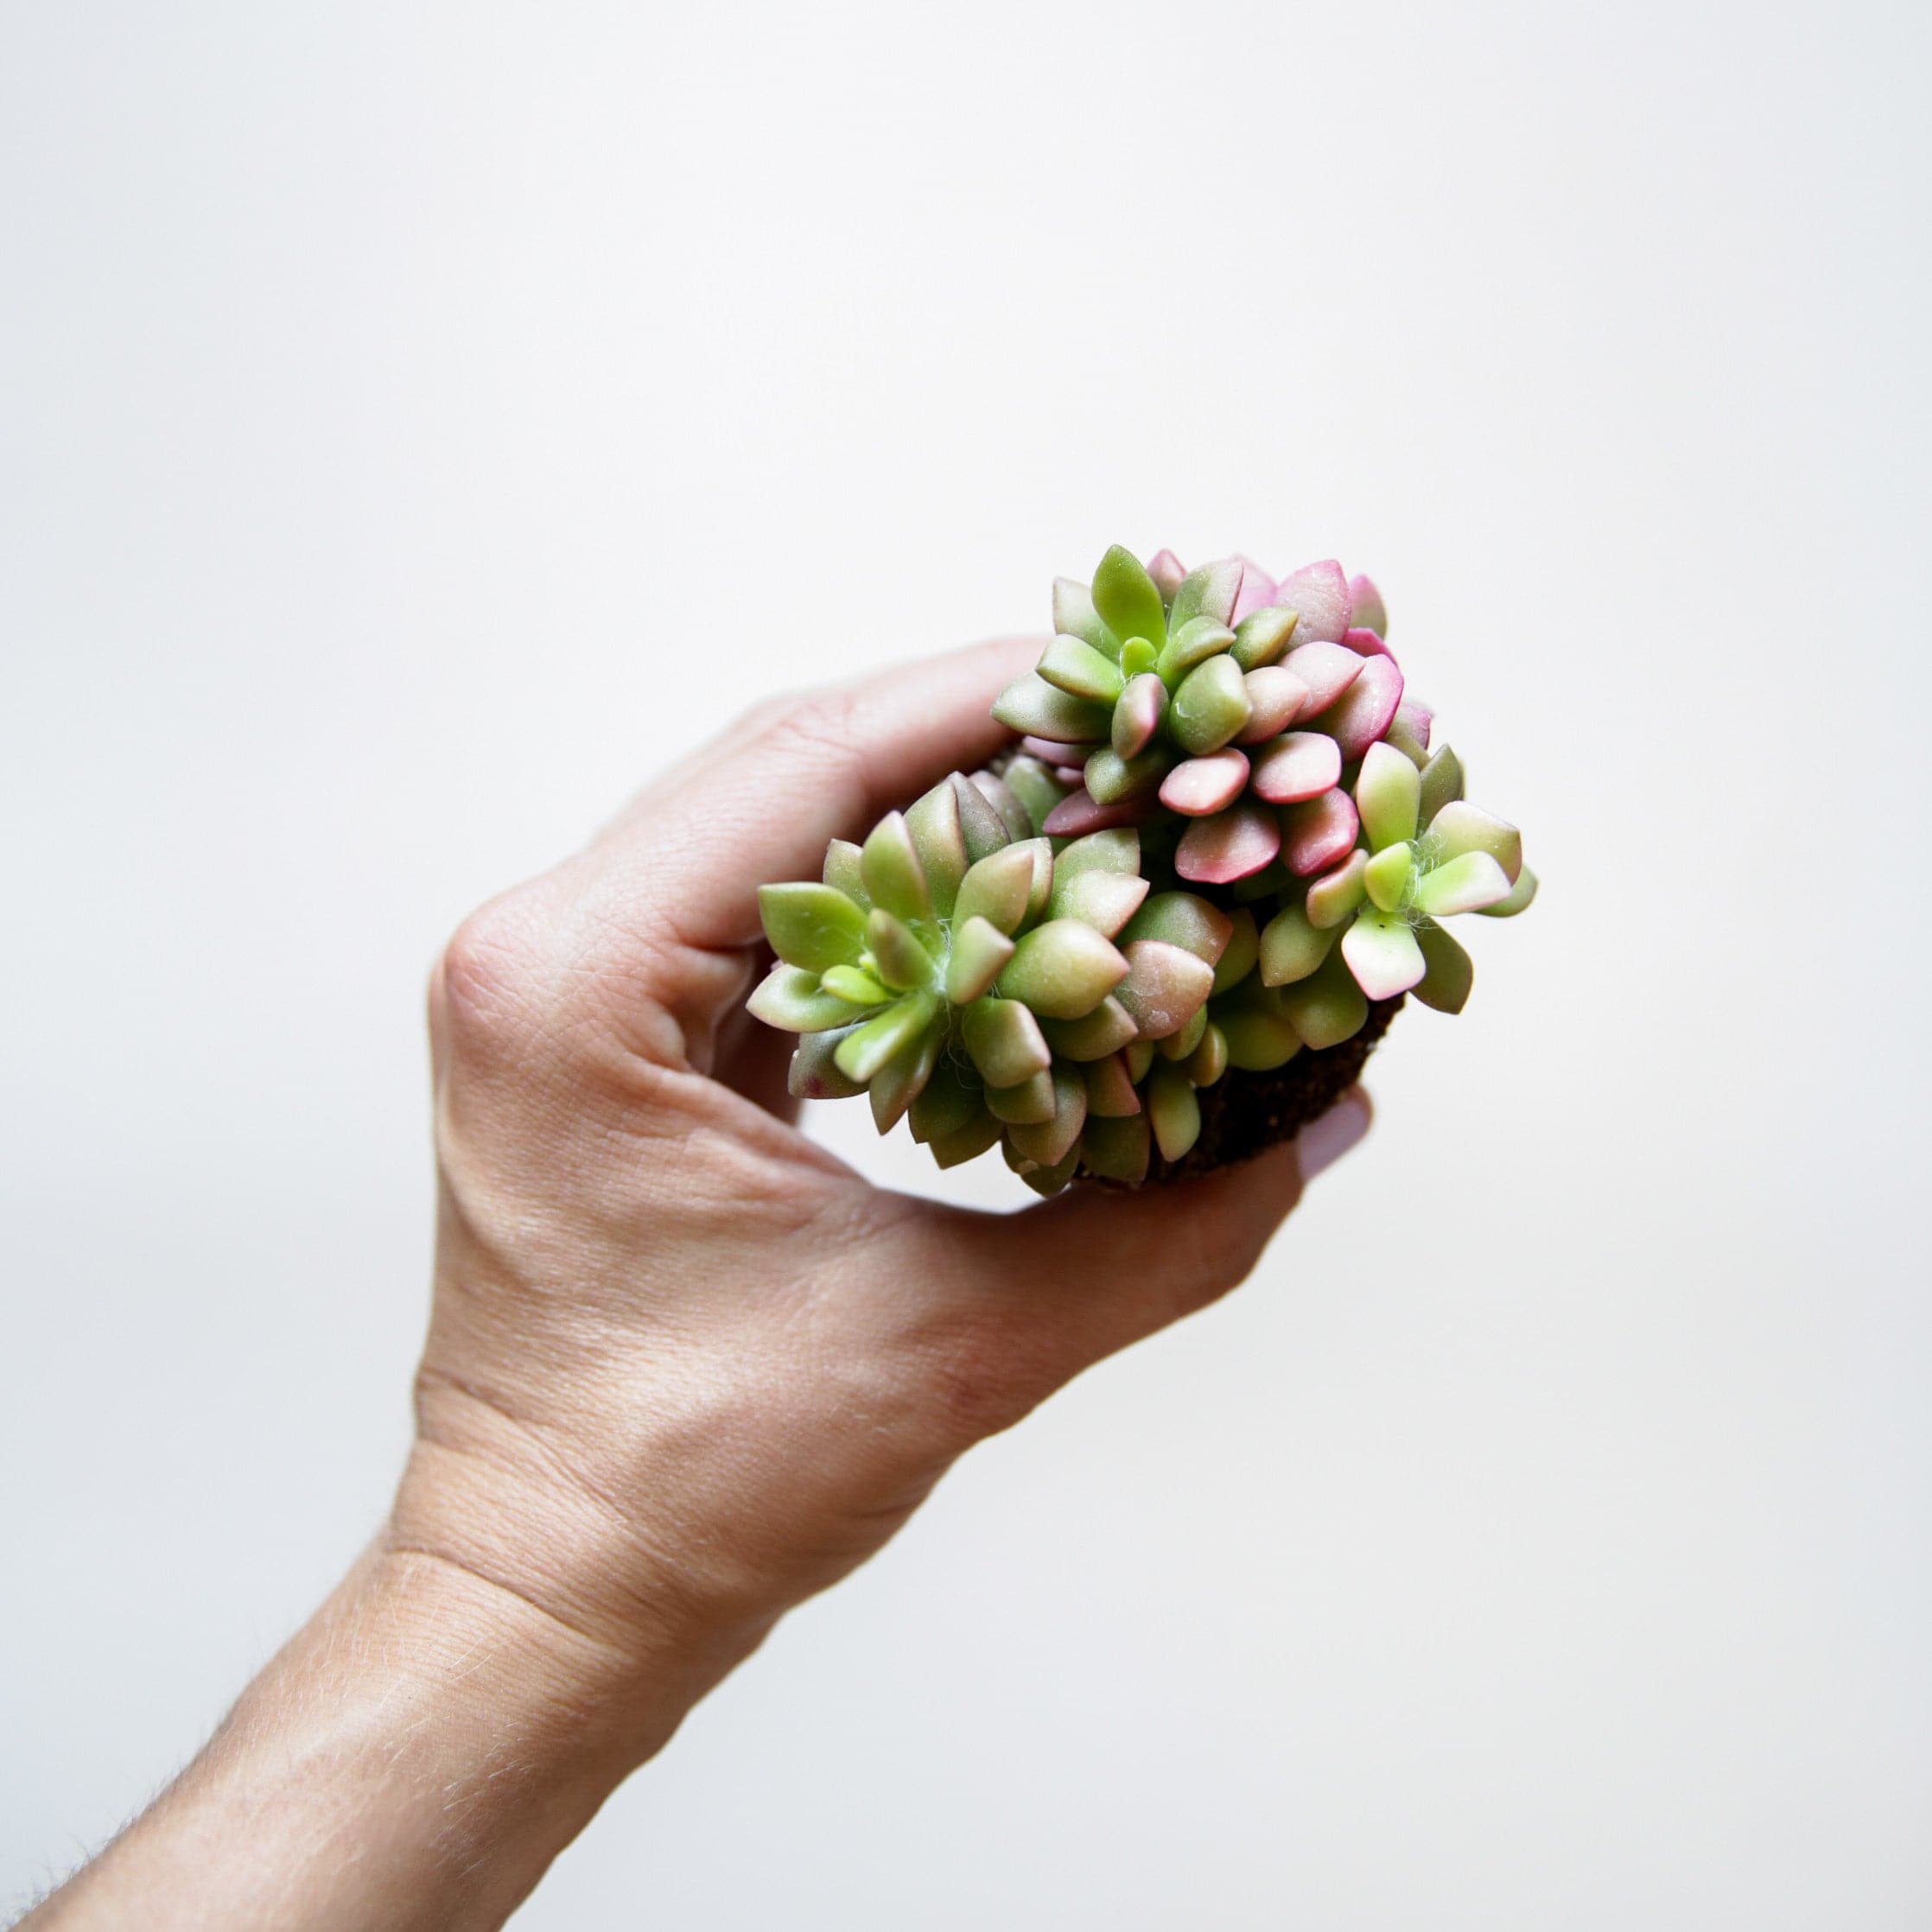 Hand holding small cluster of succulents with green and red-tinted leaves.